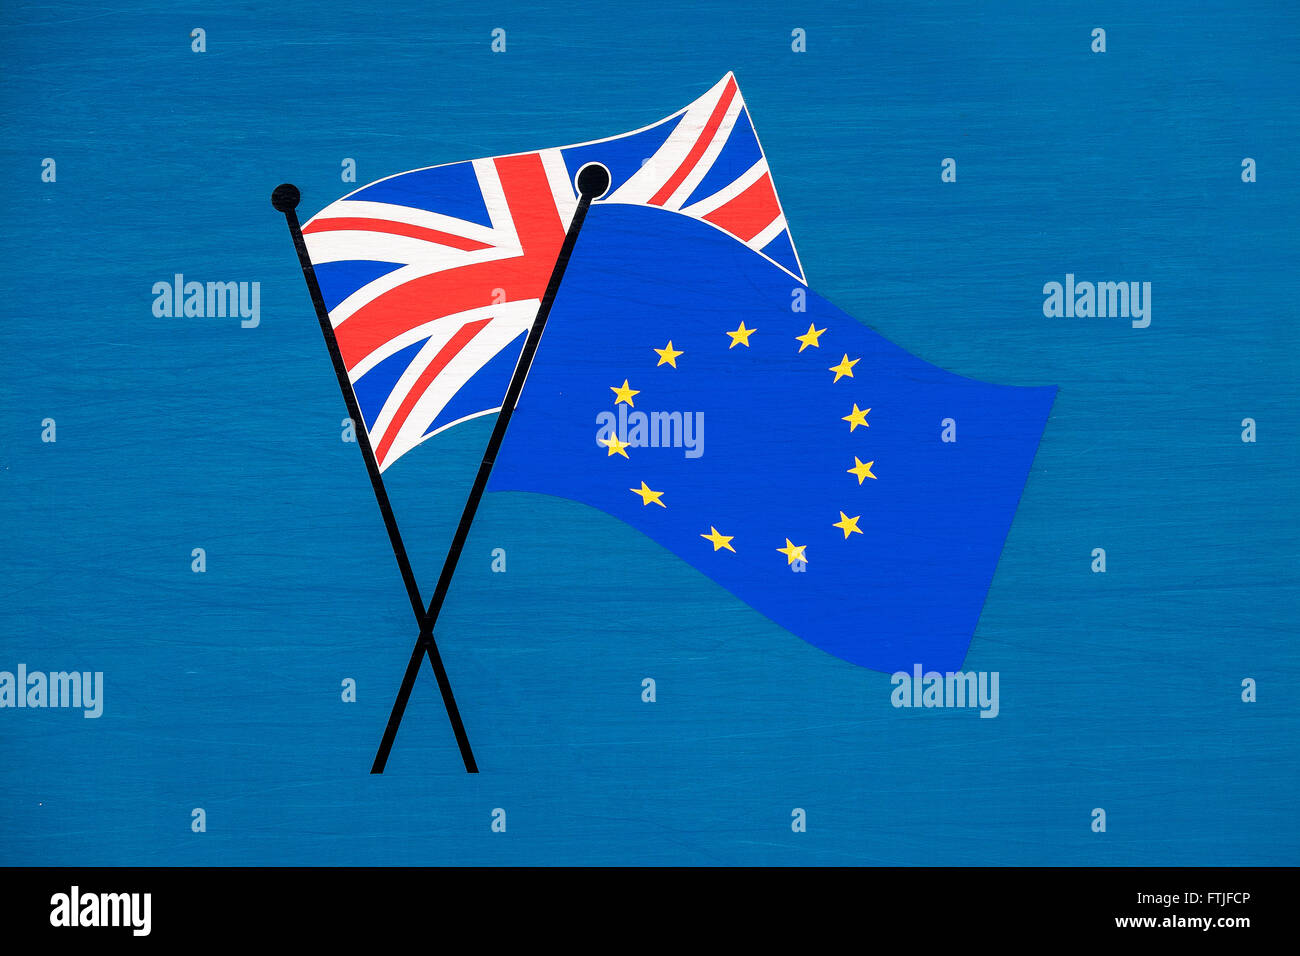 The hand painted emblem of a Union Flag together with a European Union flag Brexit. Stock Photo